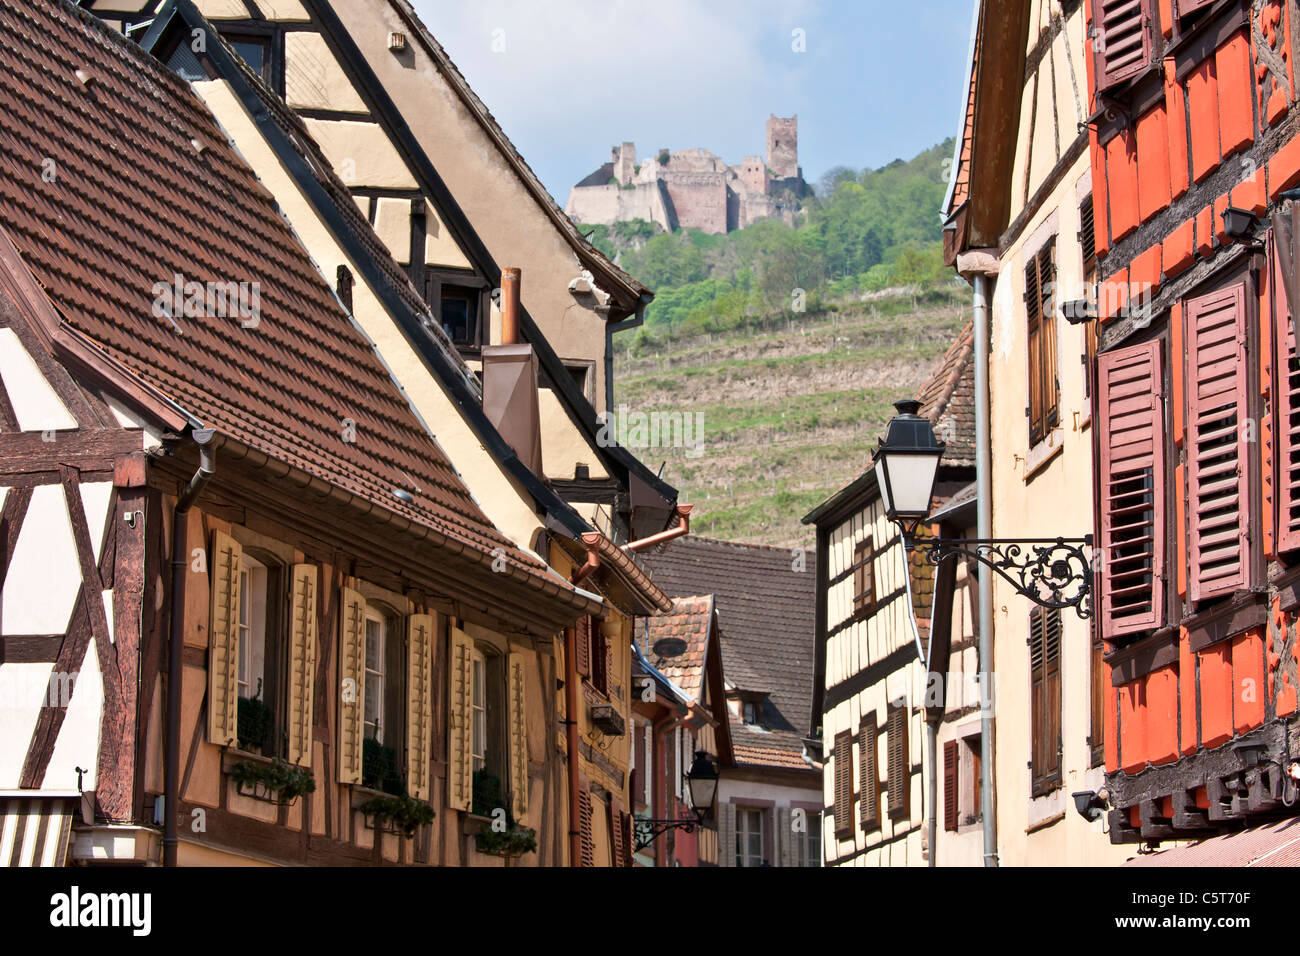 France, Alsace, RibeauvillÃ©, View of frame houses Stock Photo